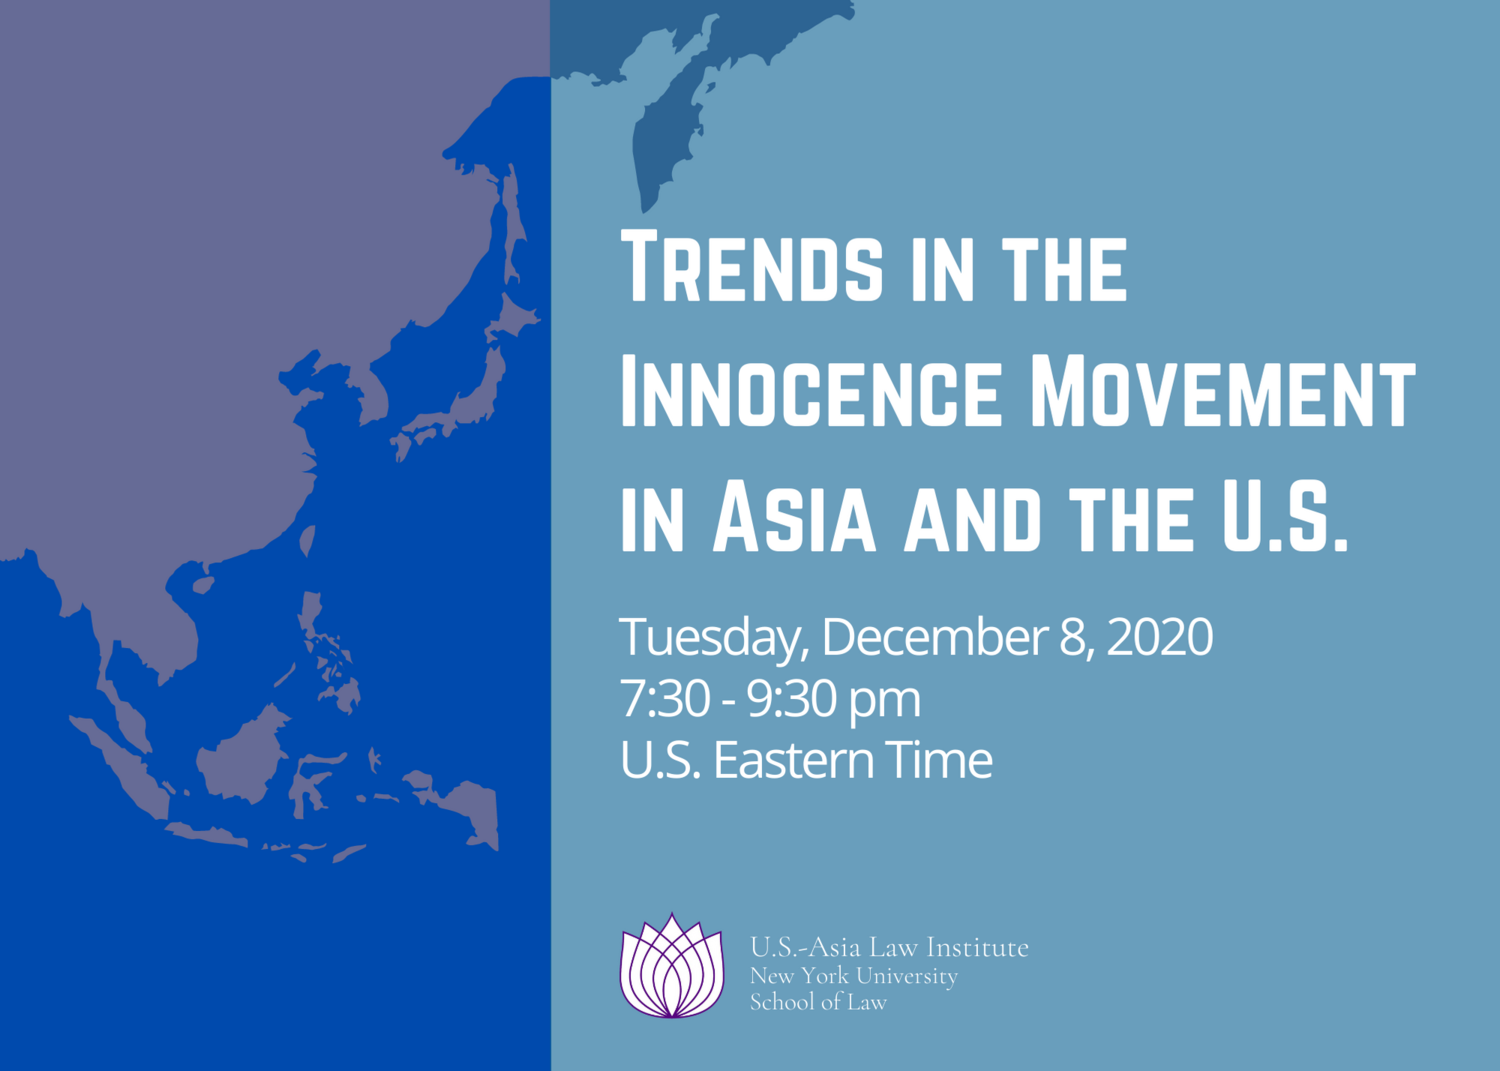 Trends in the Innocence Movement in Asia and the U.S.